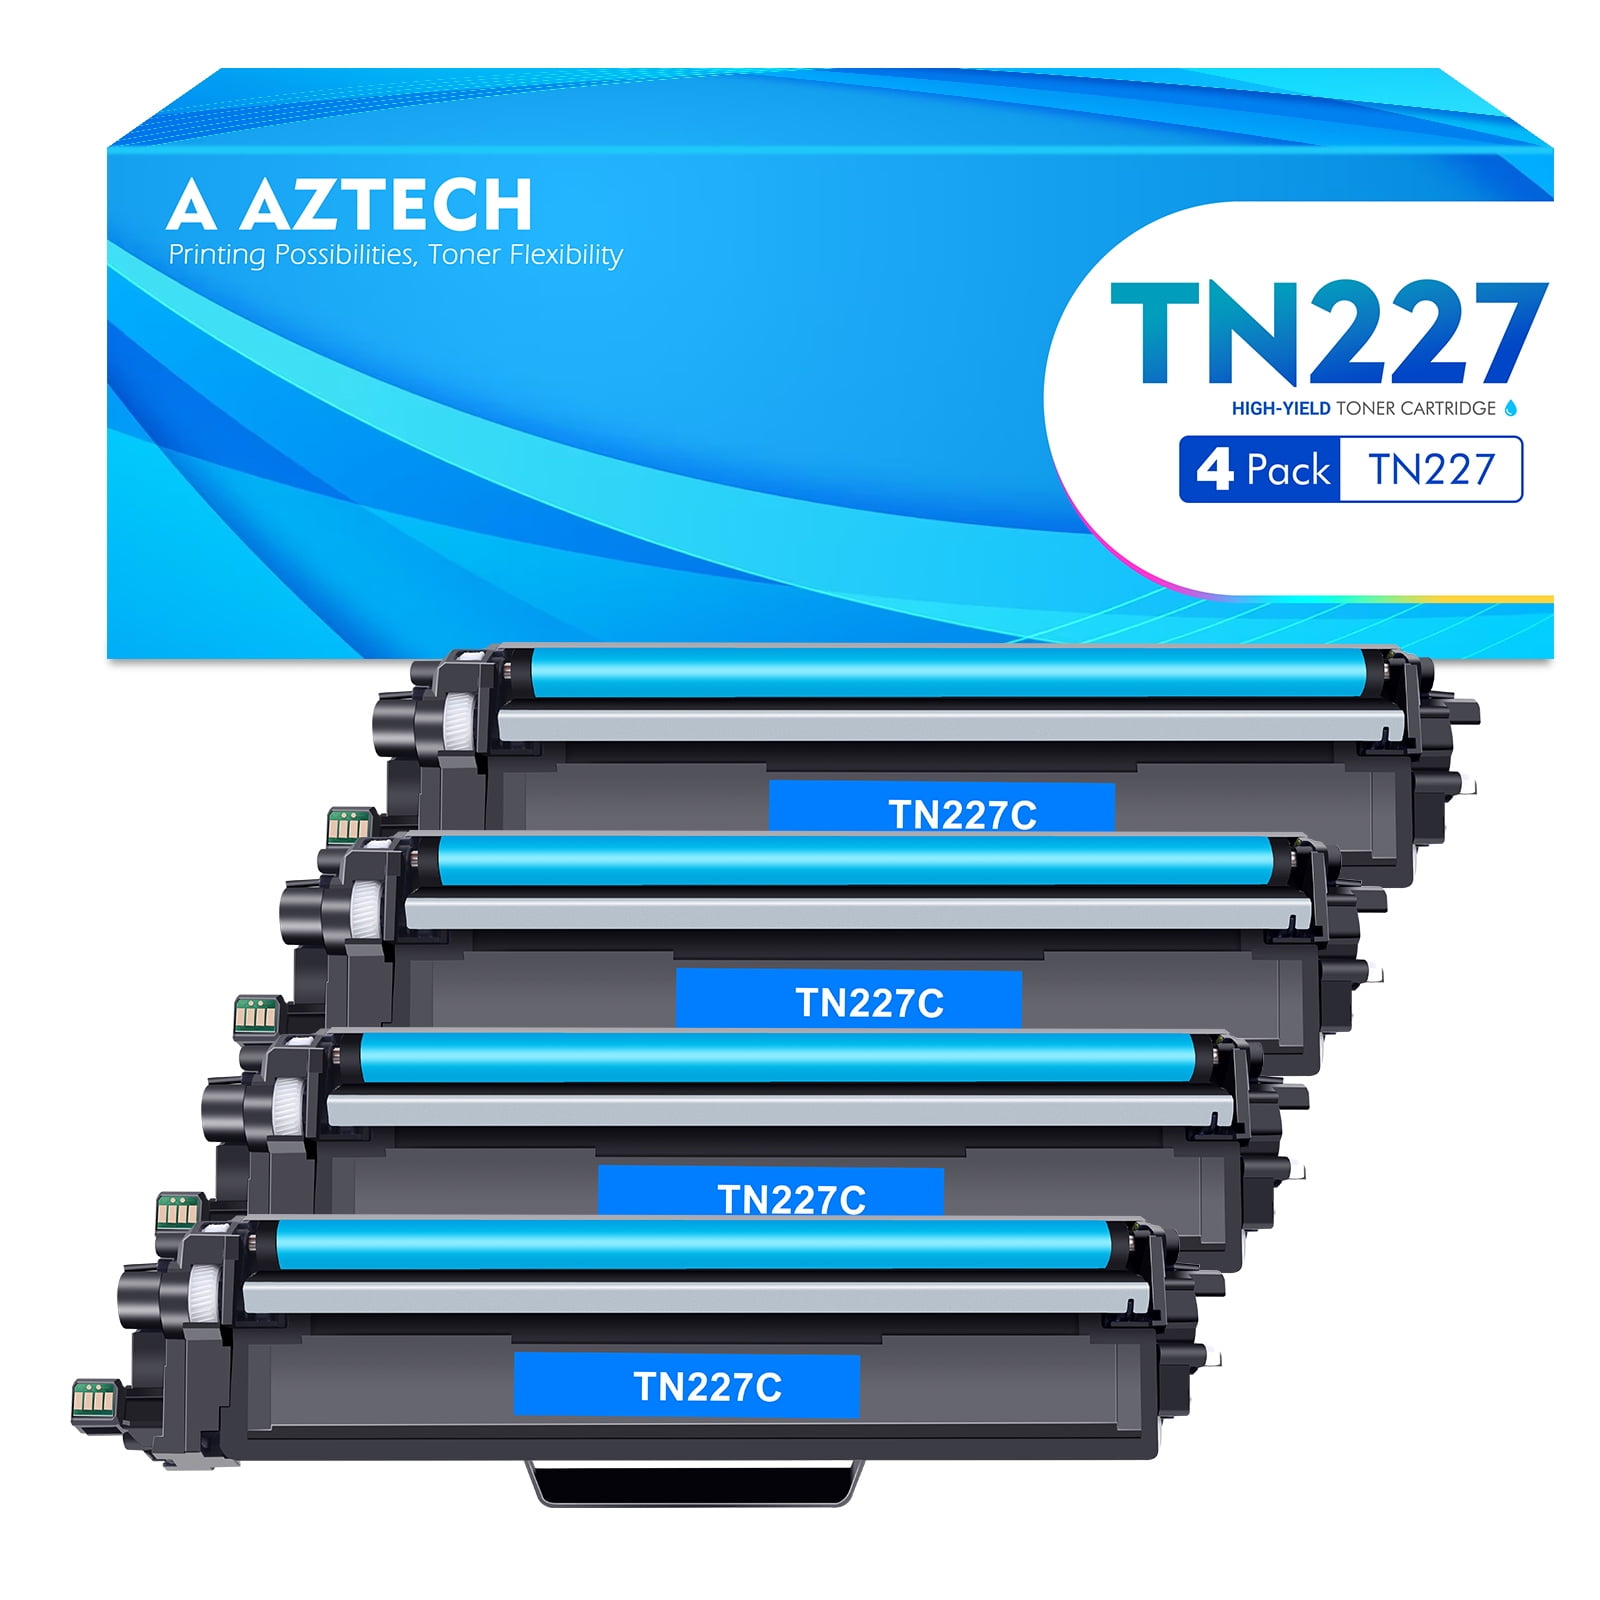 A AZTECH 1-Pack Compatible Toner Cartridge for Brother TN-221BK HL